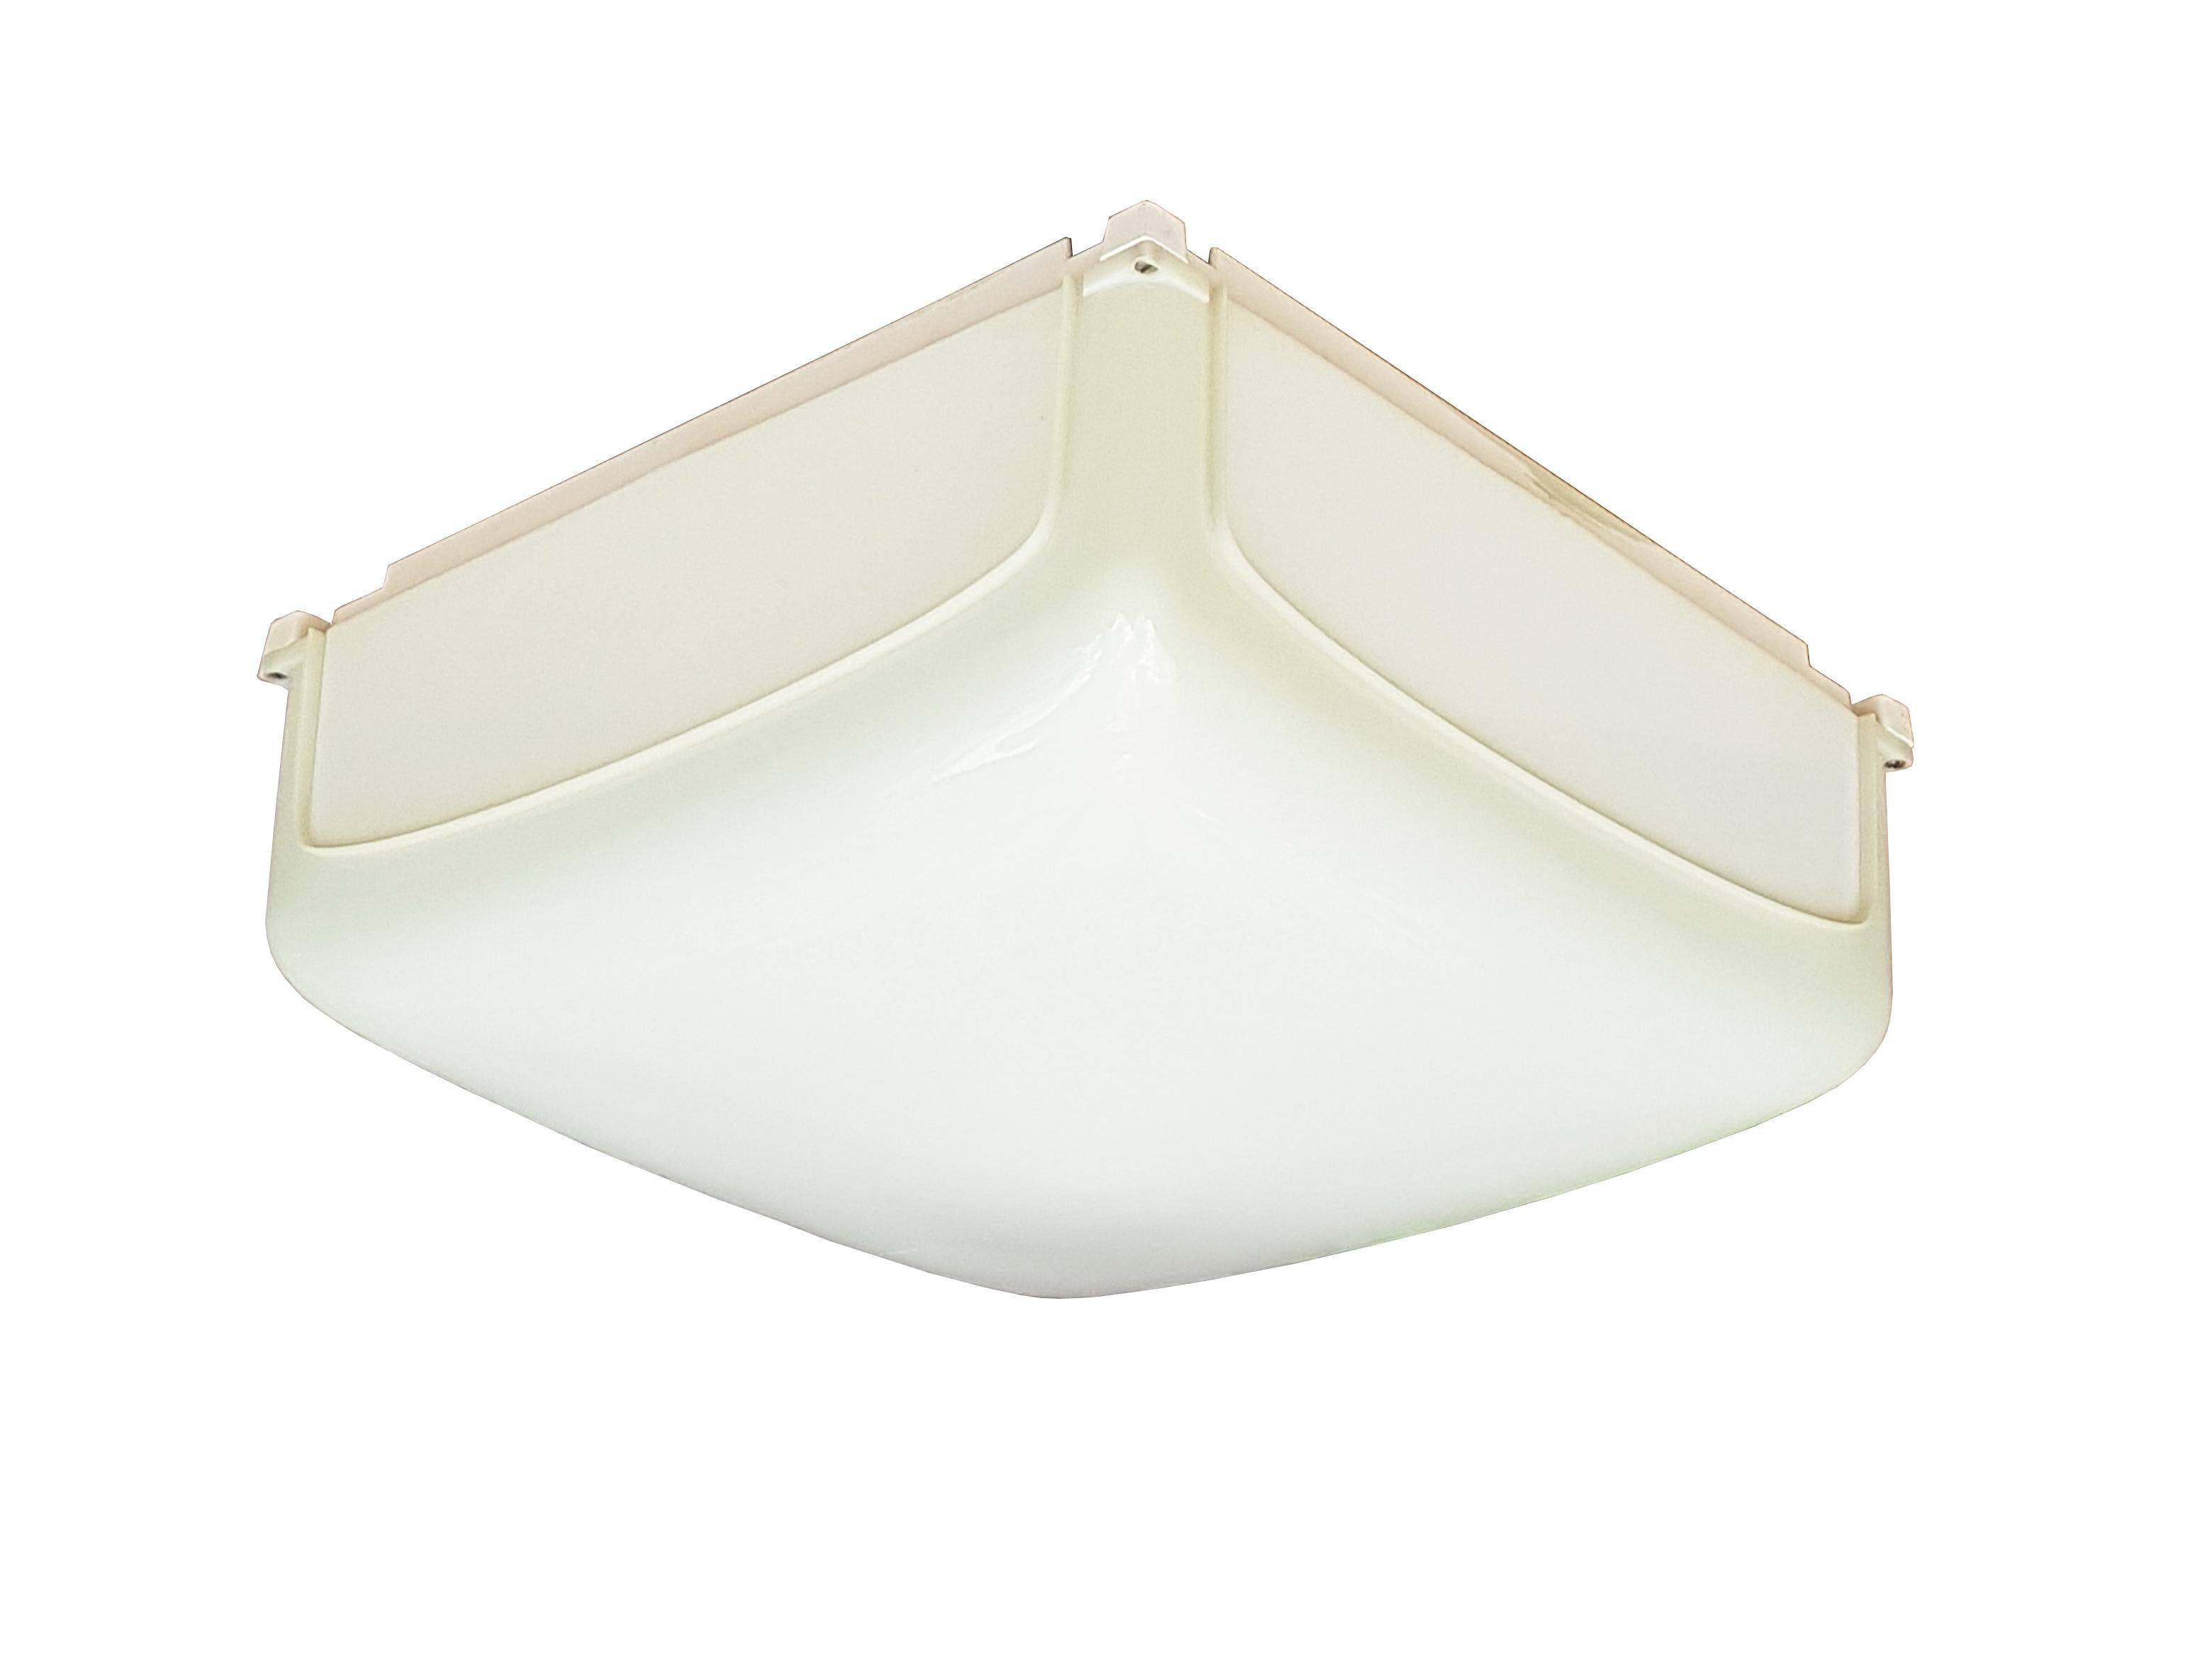 Set of 5 plastic ceiling or wall lamps designed in 1969 by Angelo Mangiarotti and produced by Artemide. The lamps can be combined to form a light panel of various shapes or placed separately. Originally the plastic was white in color, but due to